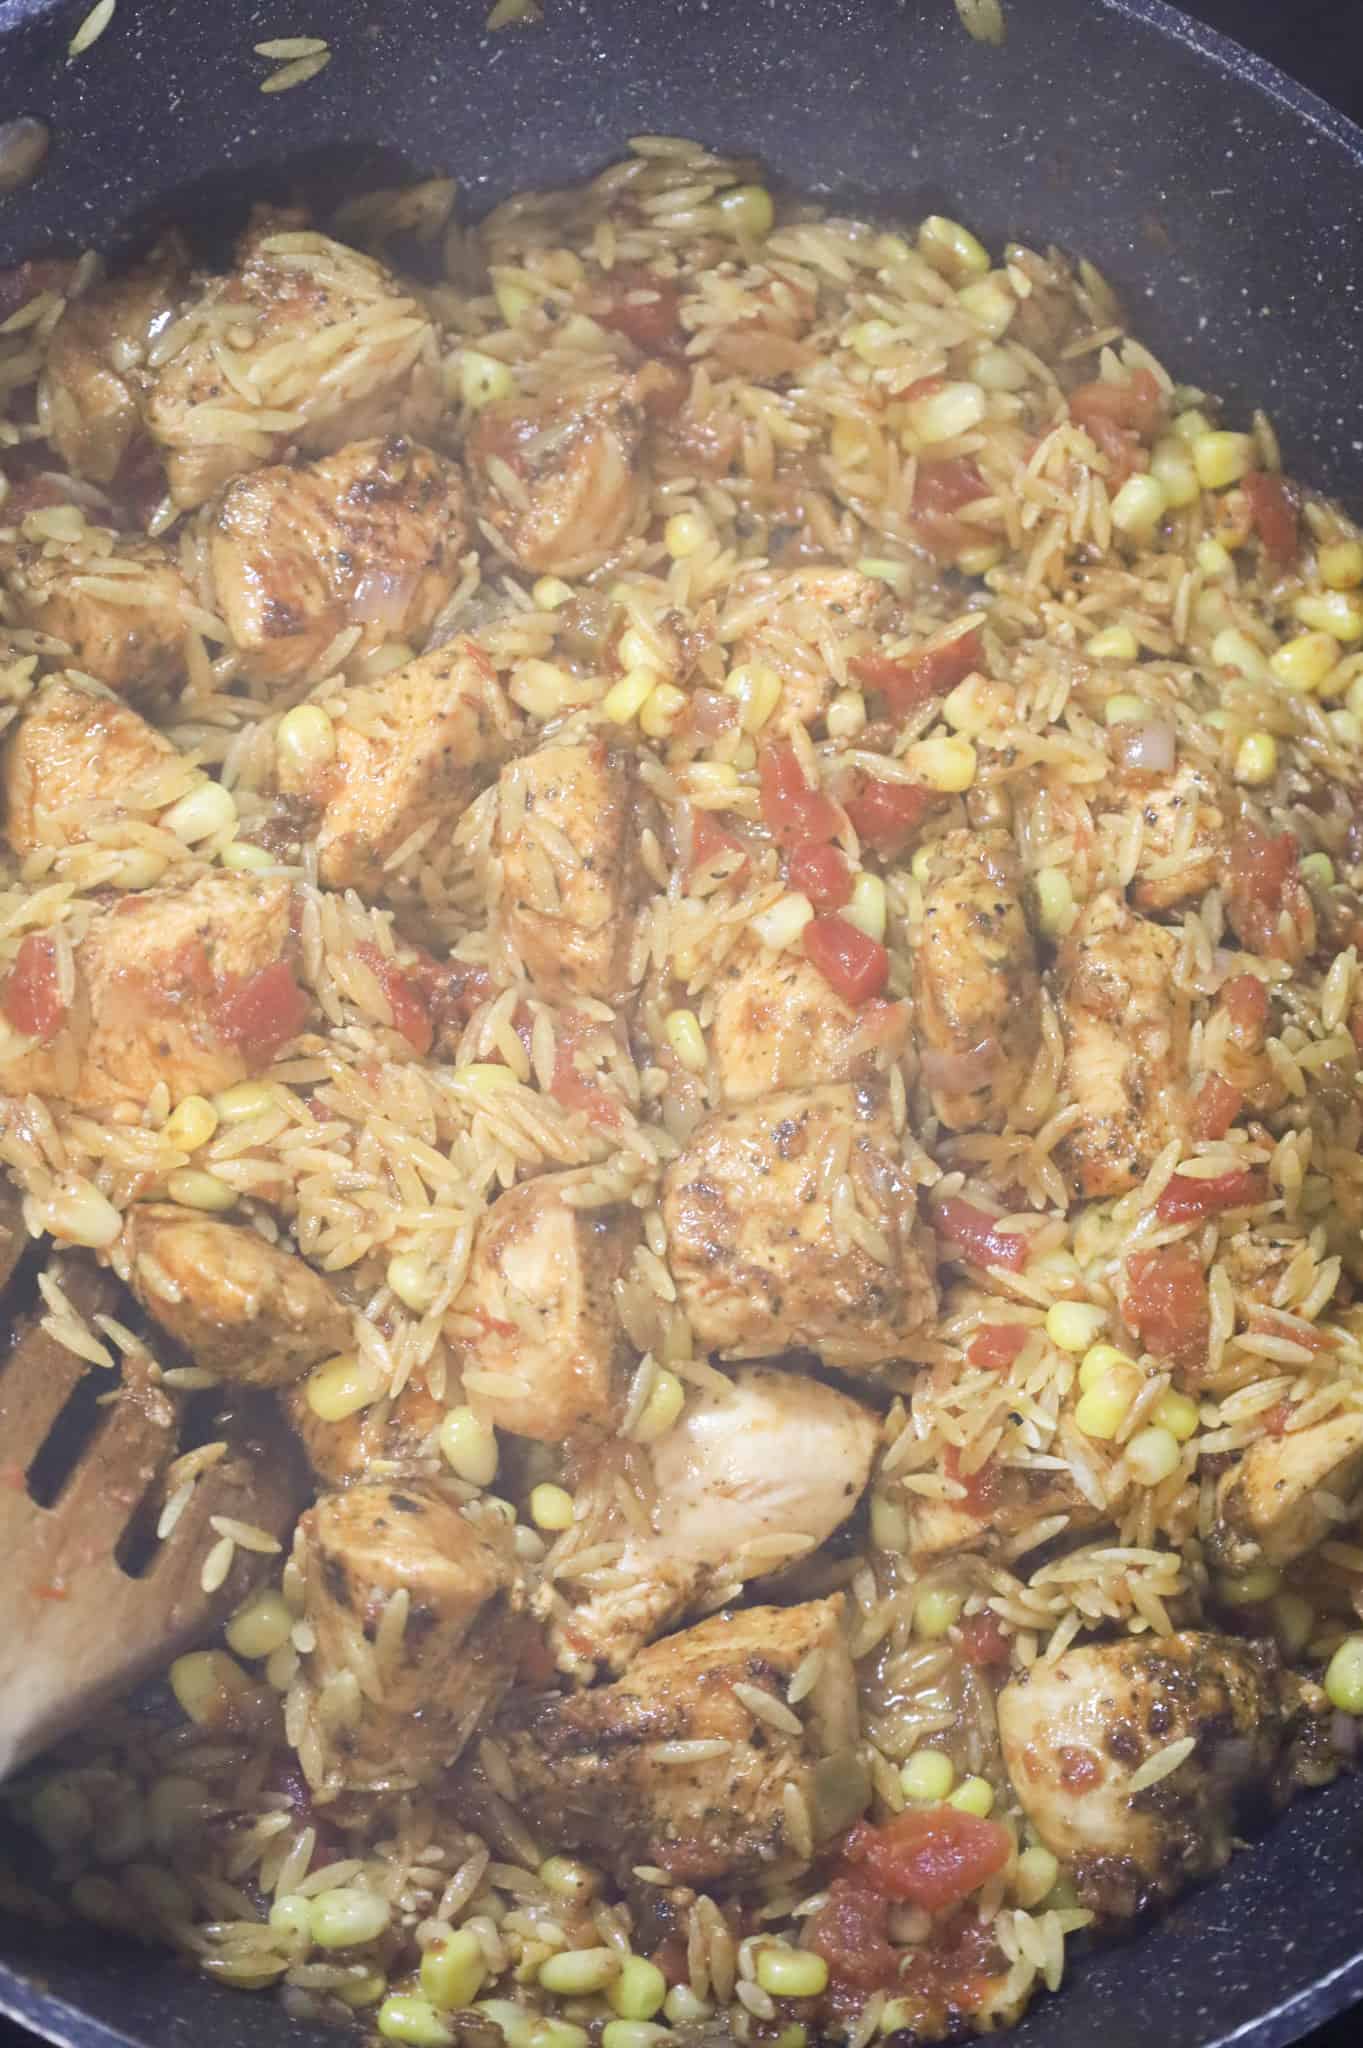 corn and Rotel being stirred with chicken and orzo pasta in a skillet